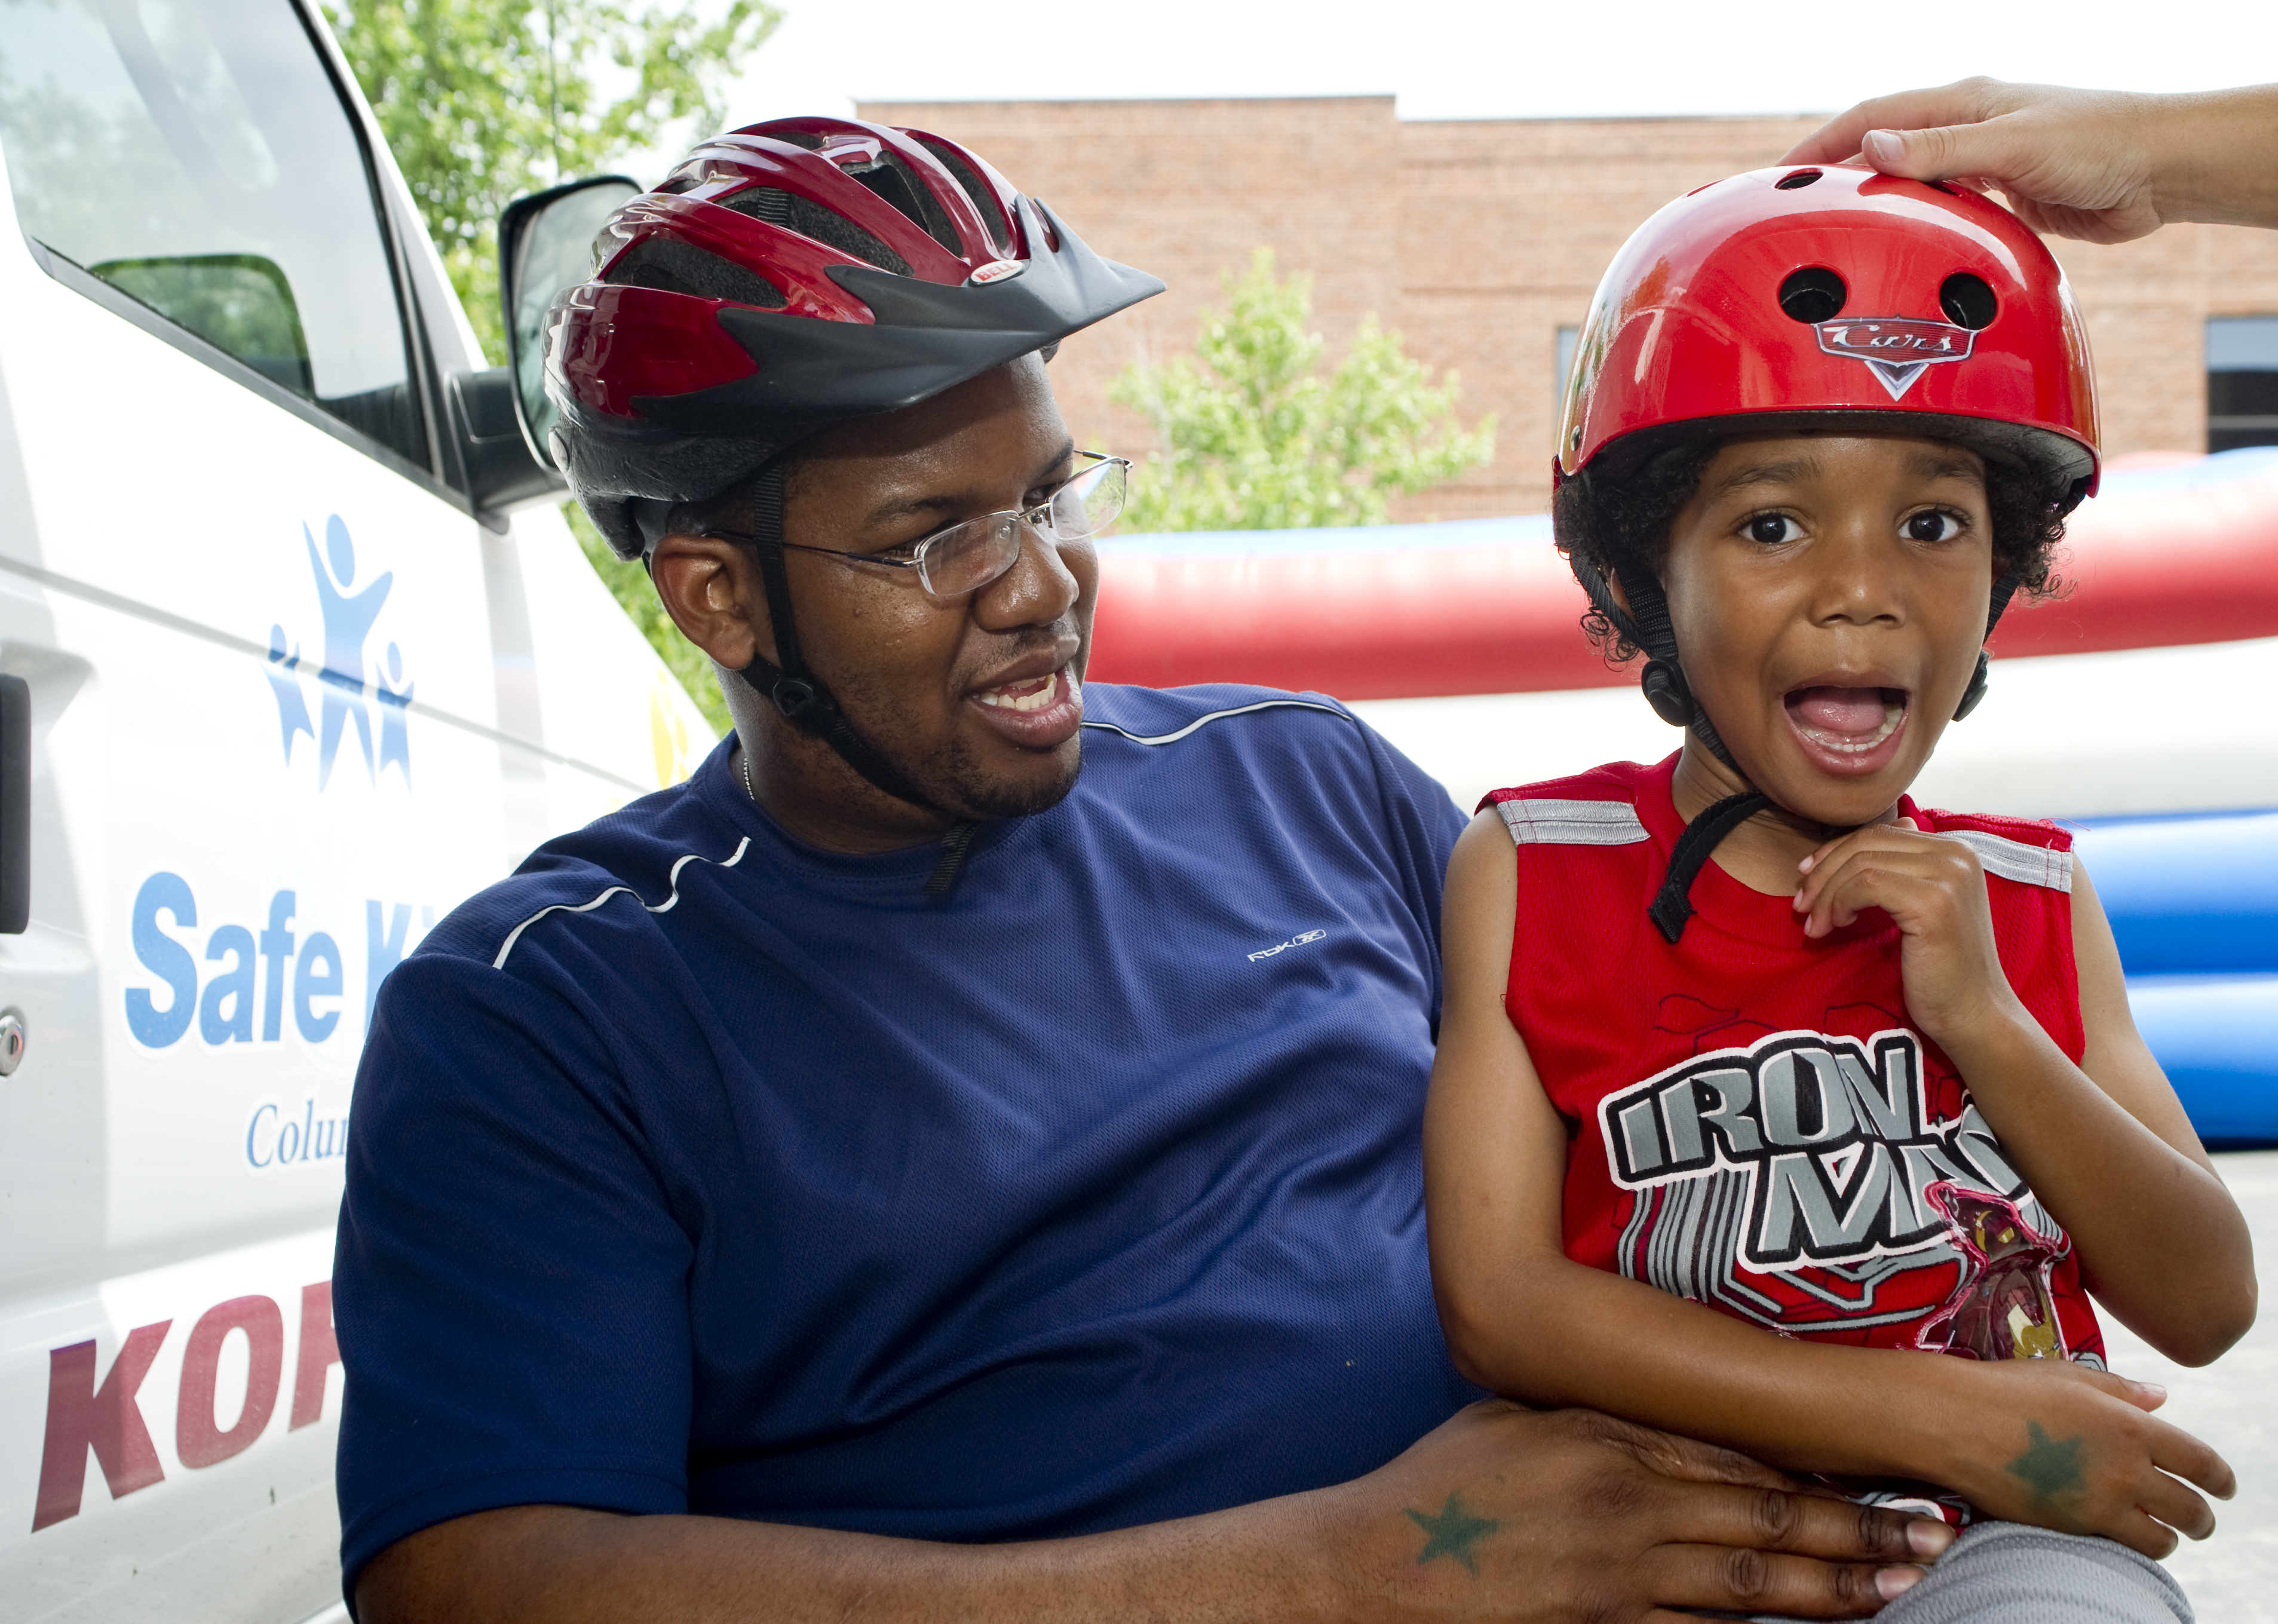 safe kids day parent and child with helmets